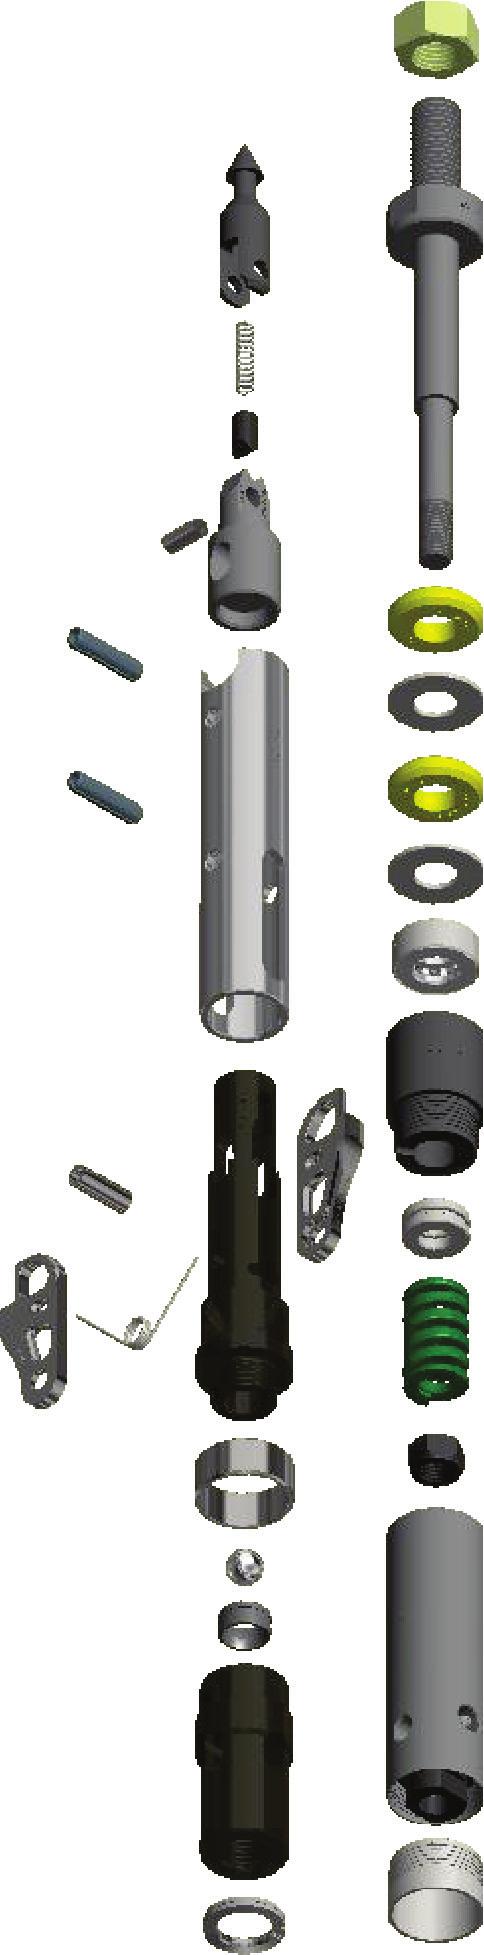 HEAD ASSEMBLY, N - - 00 Head Assembly, N 00 Spearhead Point 00 Spearhead Spring 00 Detent Plunger 00 Spearhead Pin 00 Spearhead Base 009 Latch Retracting Pin 00 Latch Retracting Case 00 Latch Body,